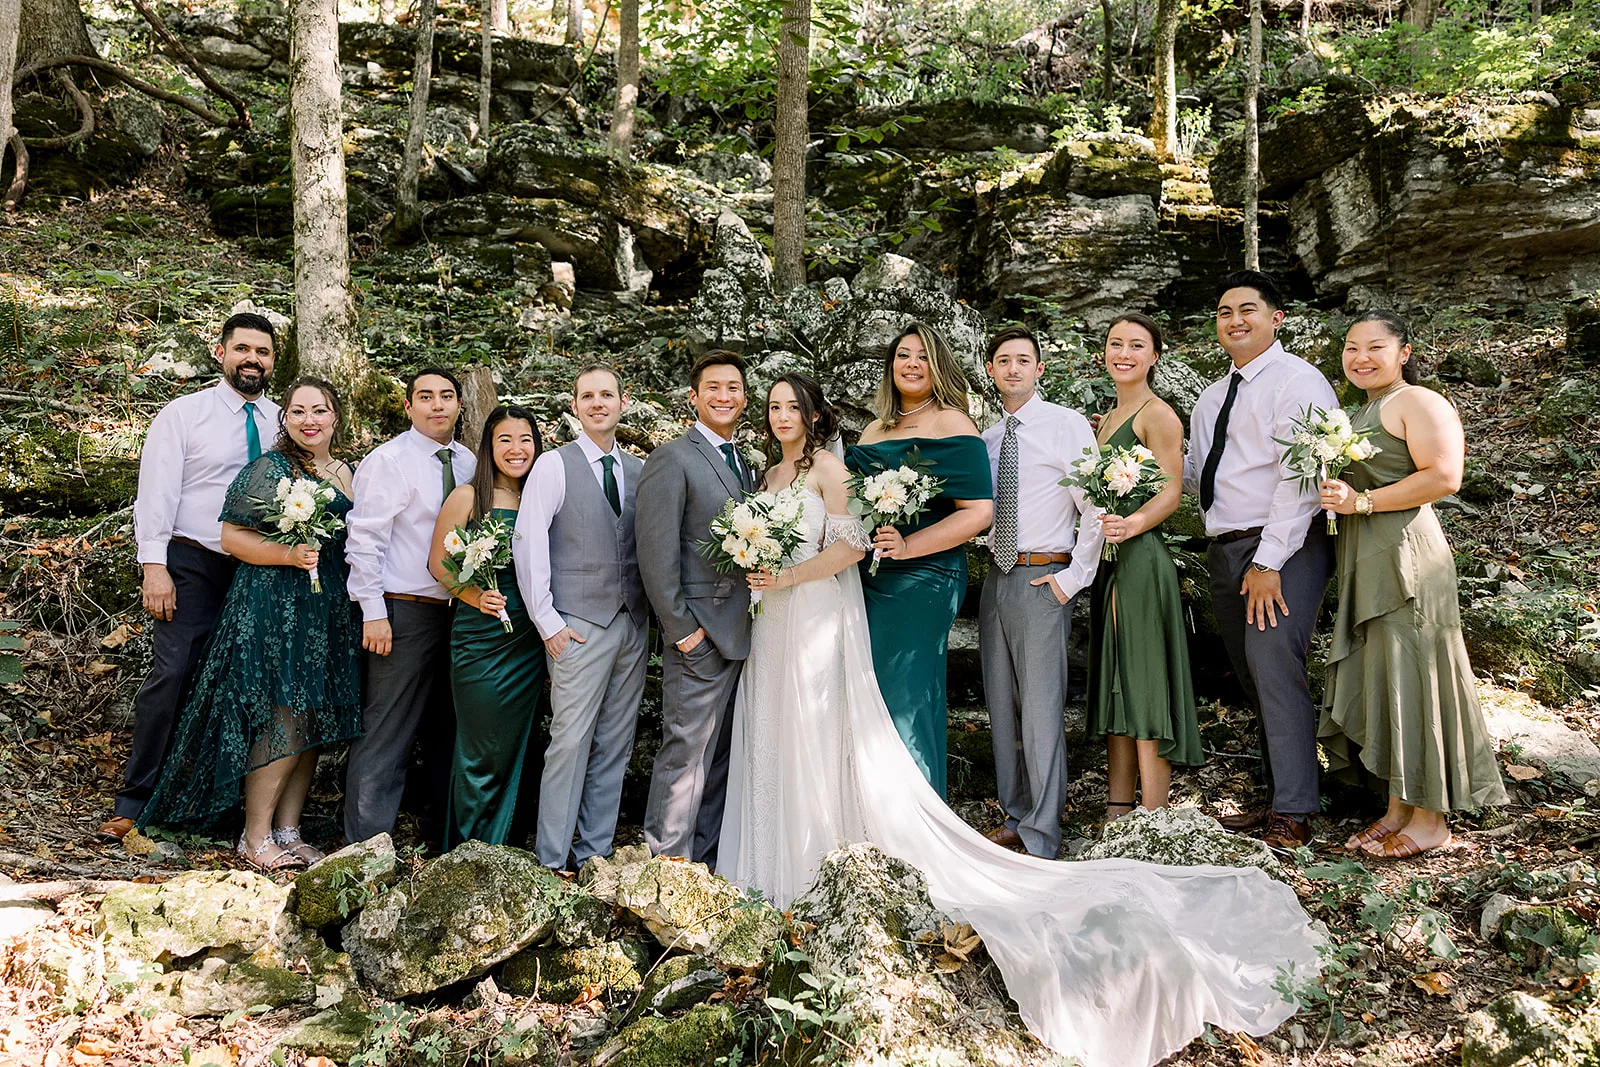 Newlyweds stand with their wedding party on a mountain trail in the forest